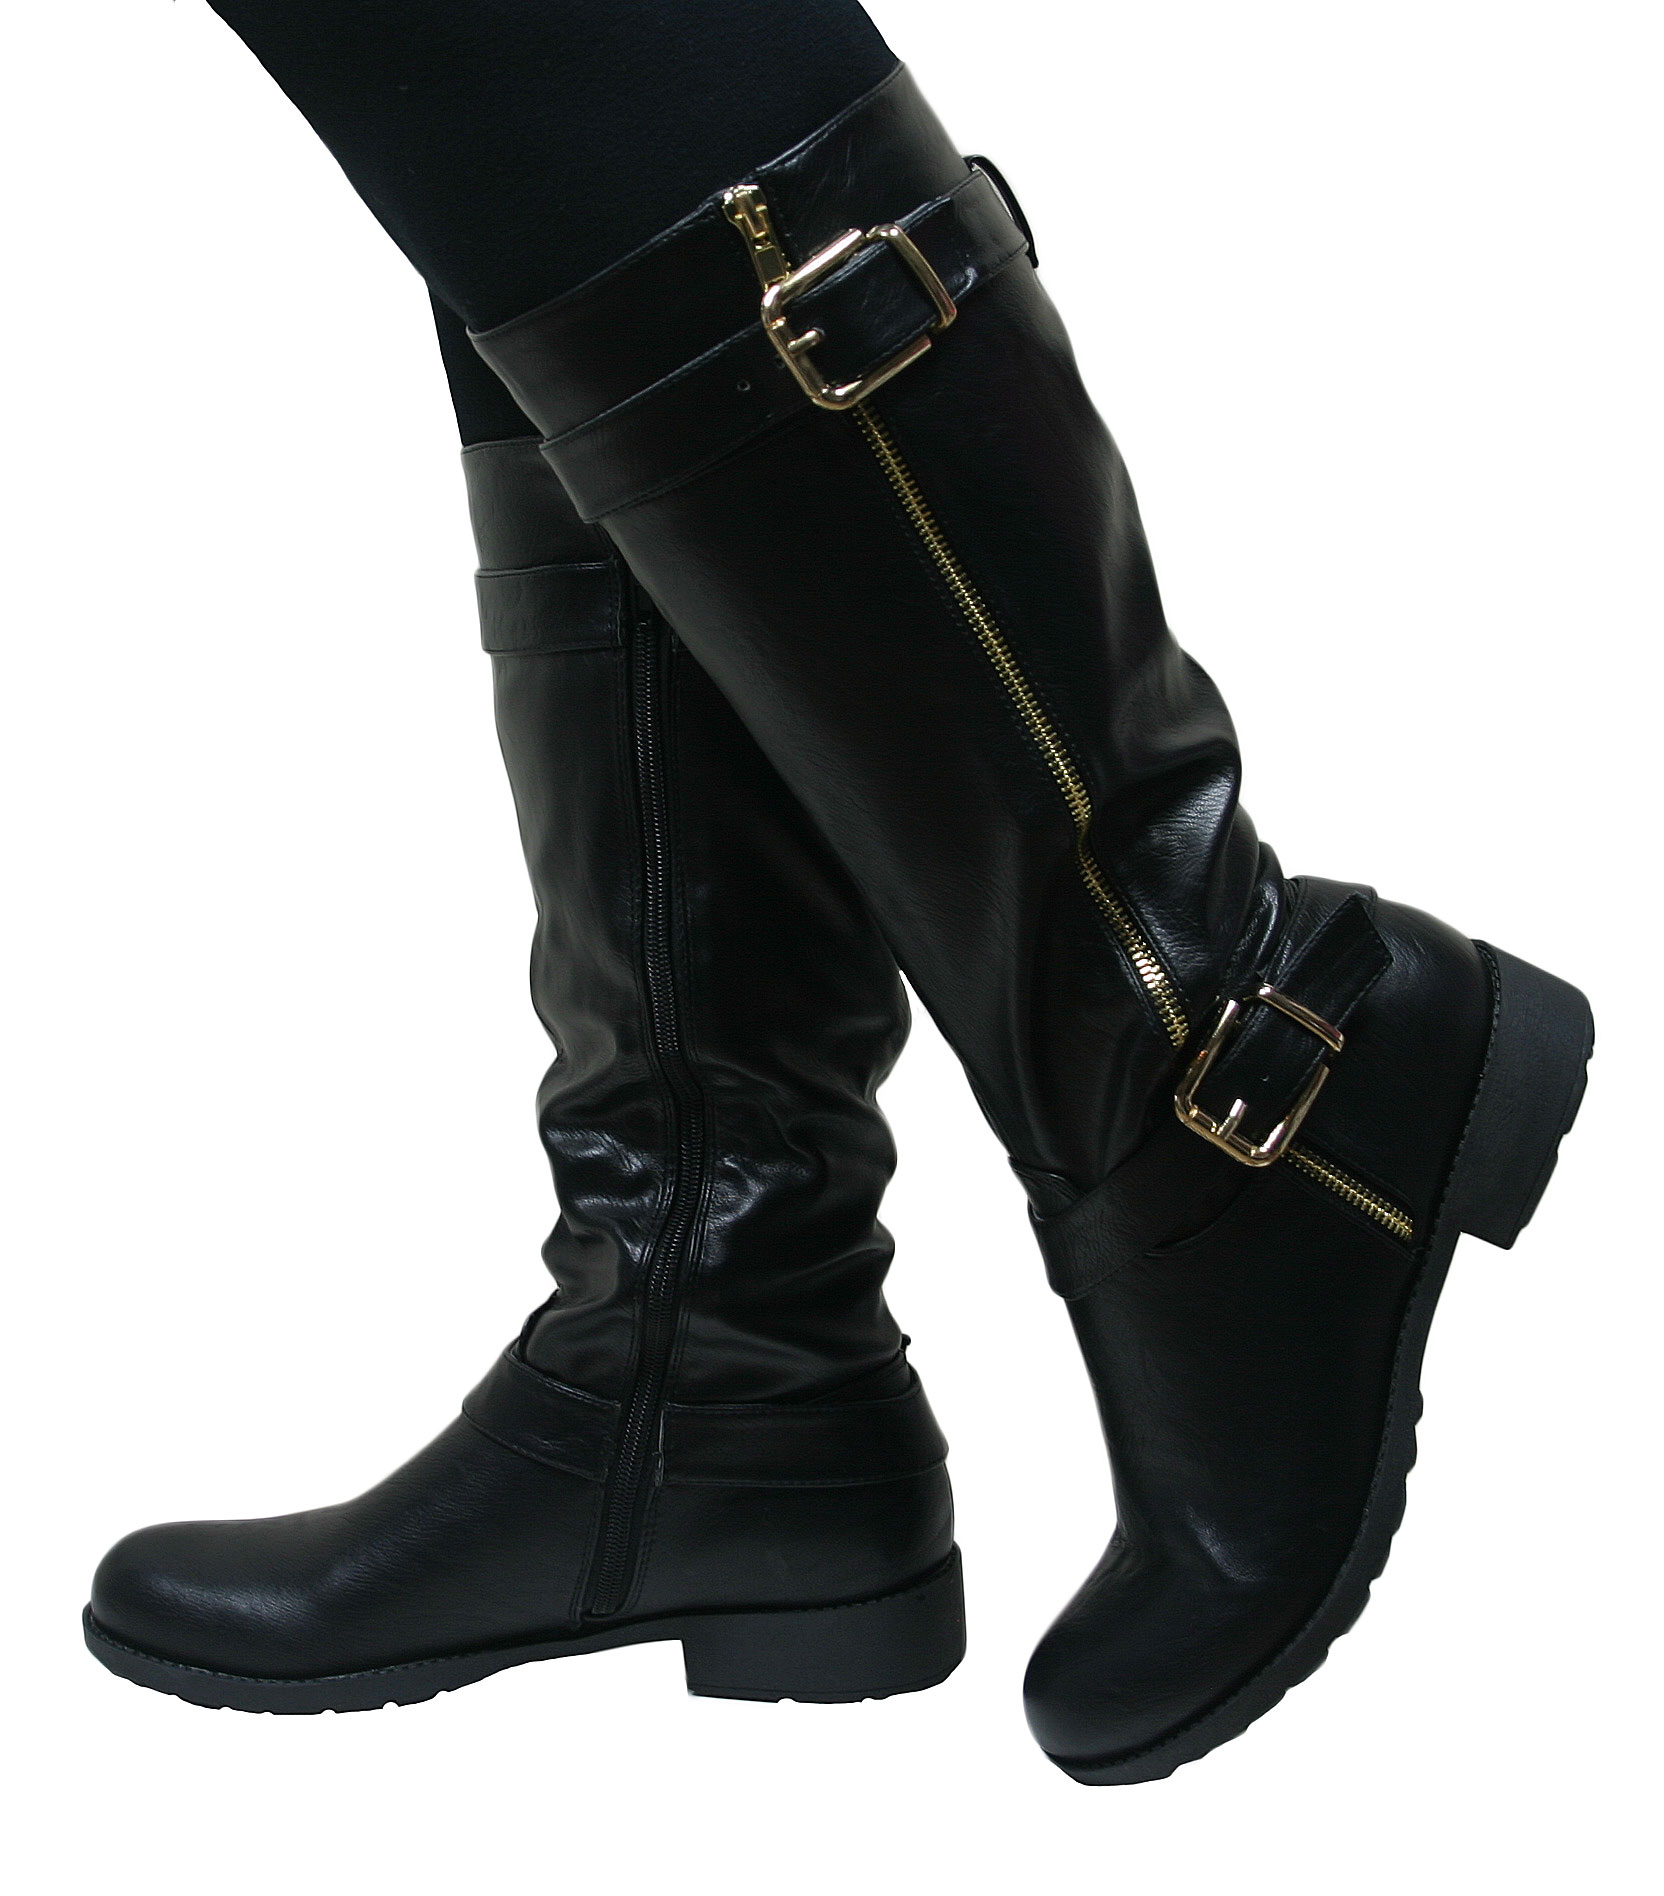 Coolest Motorcycle Boots For Women